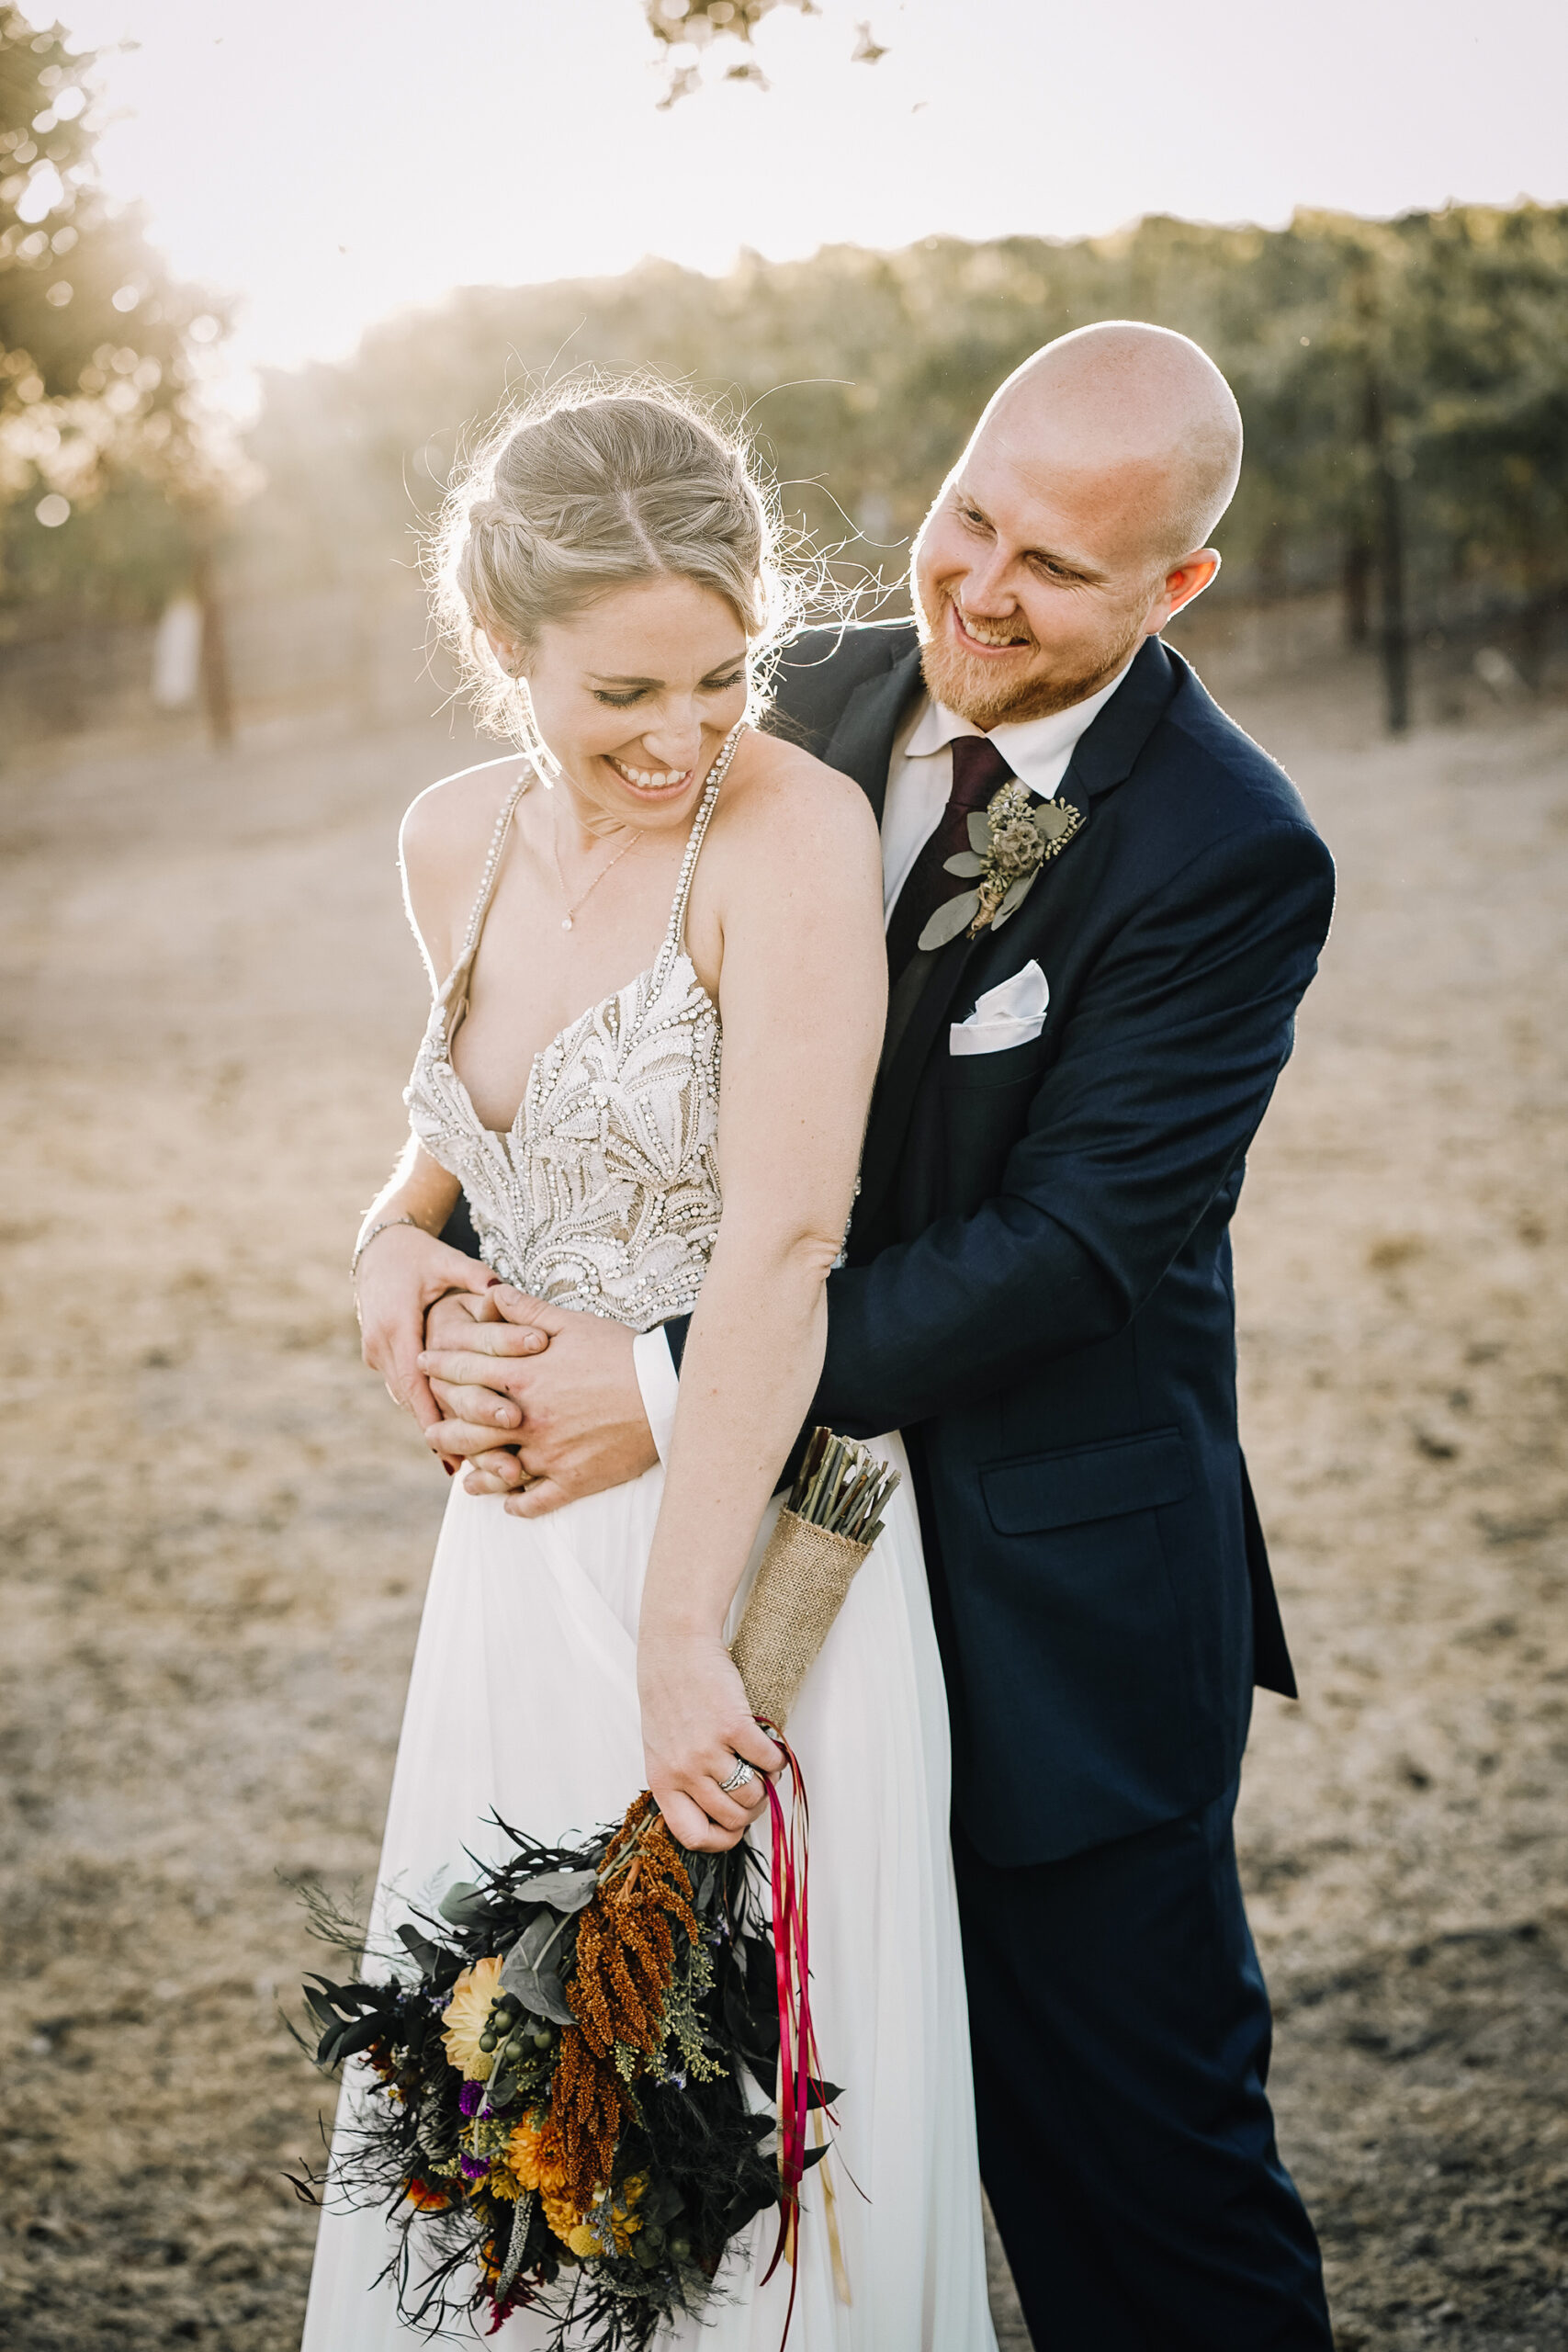 Kristen Carter Rustic Winery Wedding KDot Photography SBS 034 scaled